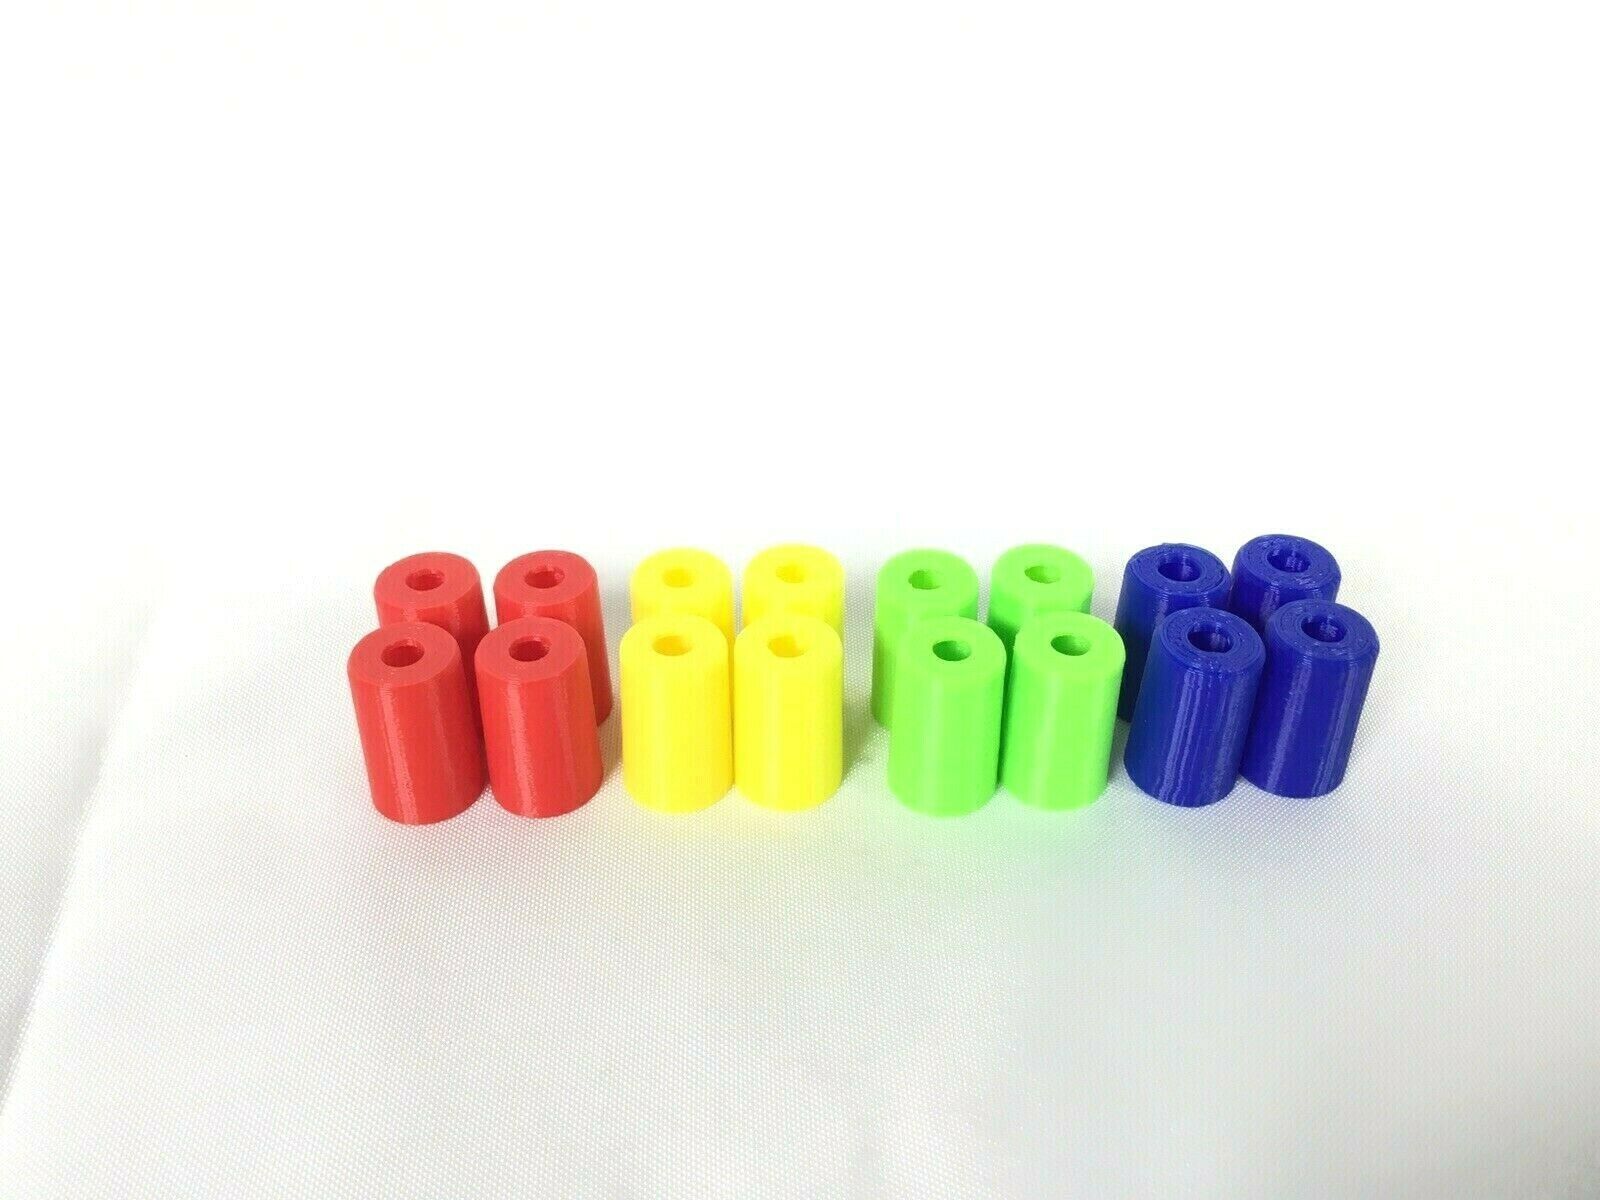 Trouble Game Replacement Pieces Parts 16 Total Yellow Blue Green Red Tokens Pegs